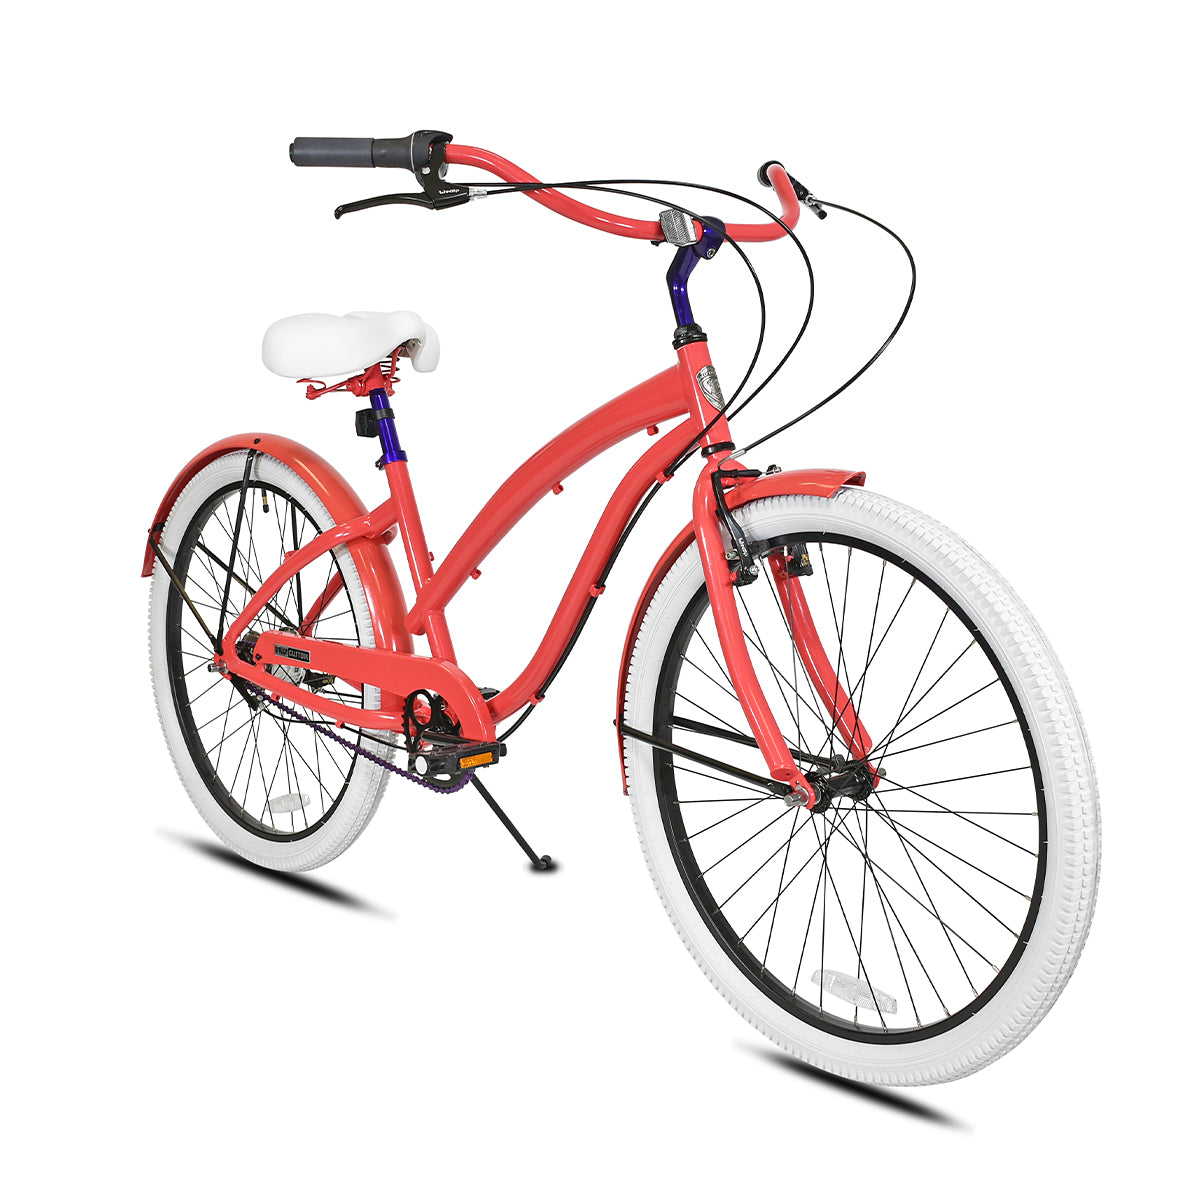 Lily 3-Speed Cruiser Coral Pink Step-Thru Frame, Fenders, and Handlebar with White Saddle and Tires and Black Chain, Pedals, Fender Braces, Grips, Handbrakes, Wheels, and Shifter with Royal Blue Posts